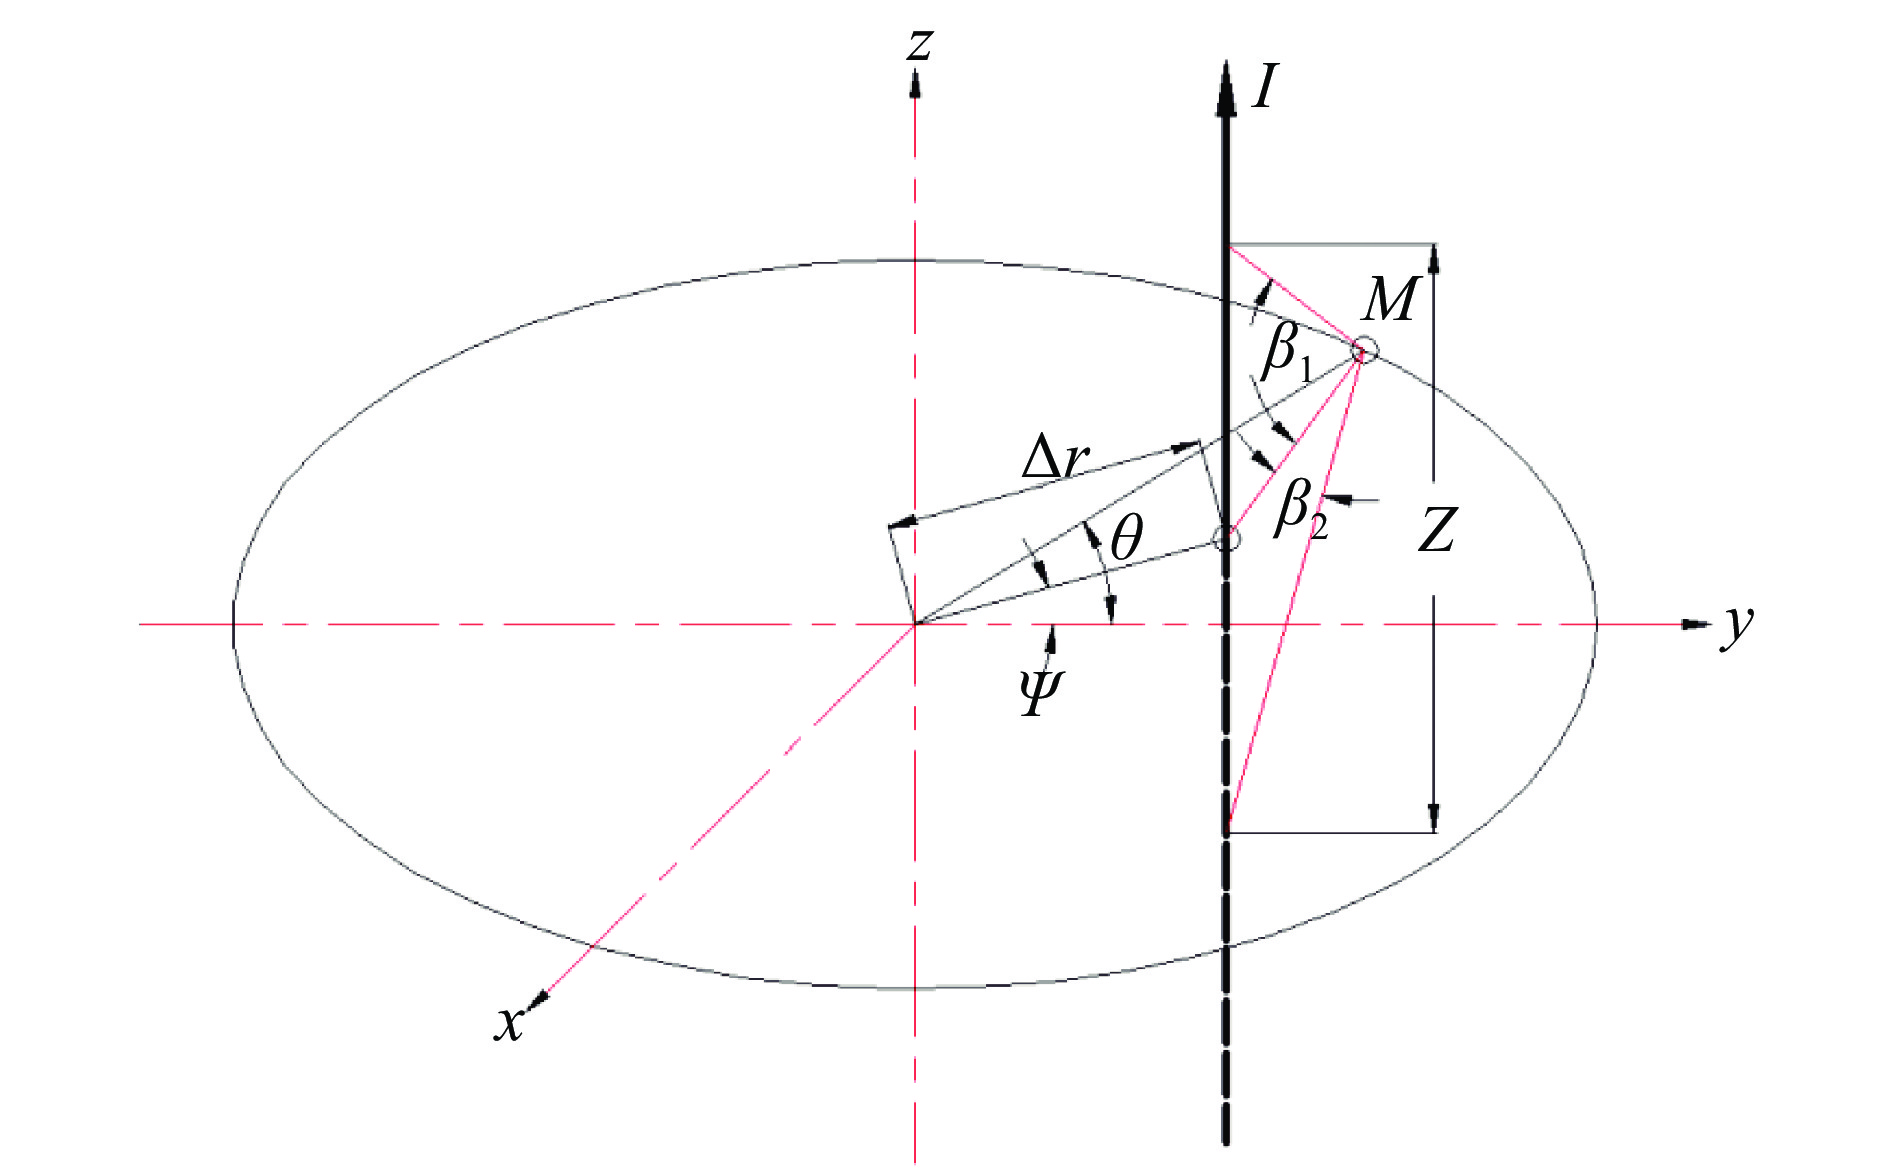 Sketch of axial magnetic field generated by infinite length line current